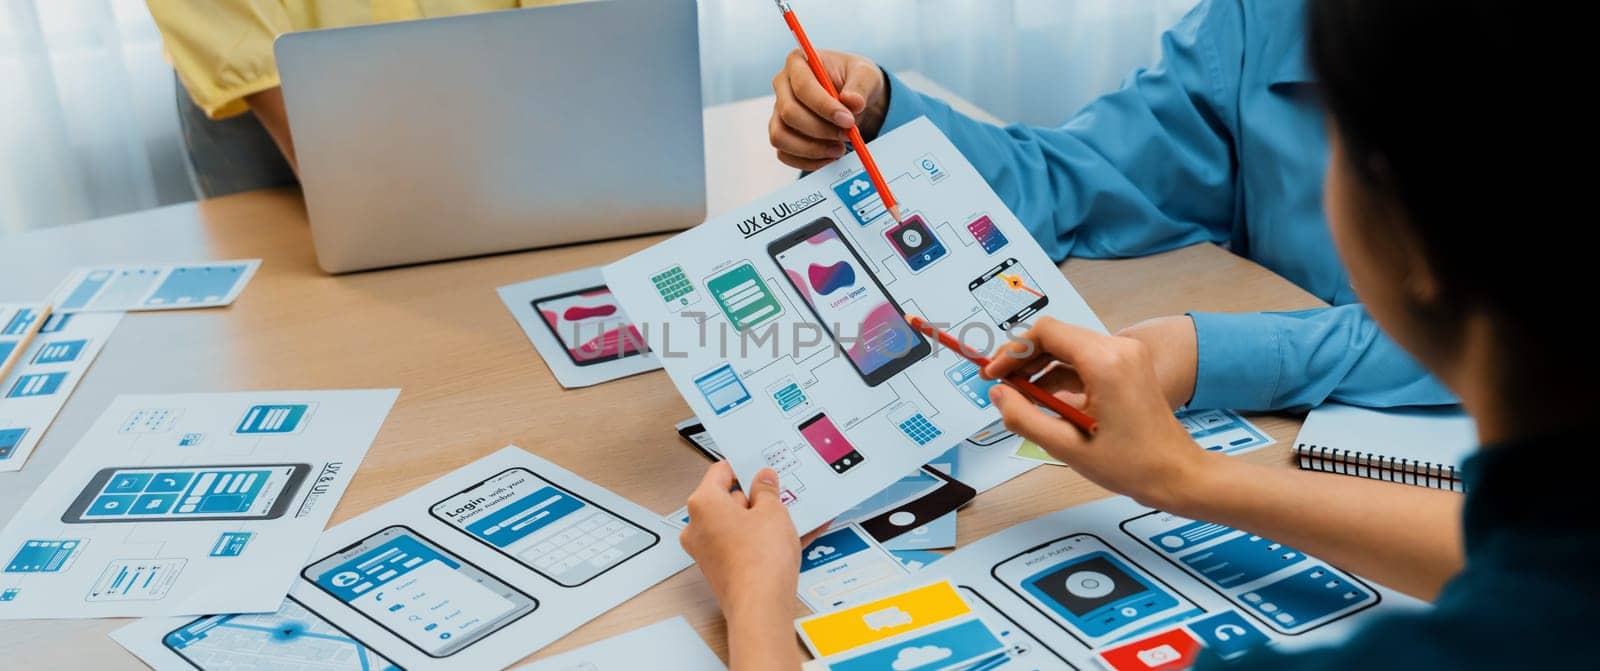 Panorama banner of startup company employee planning on user interface prototype for mobile application or website in office. UX UI designer brainstorm user friendly interface plan. Synergic